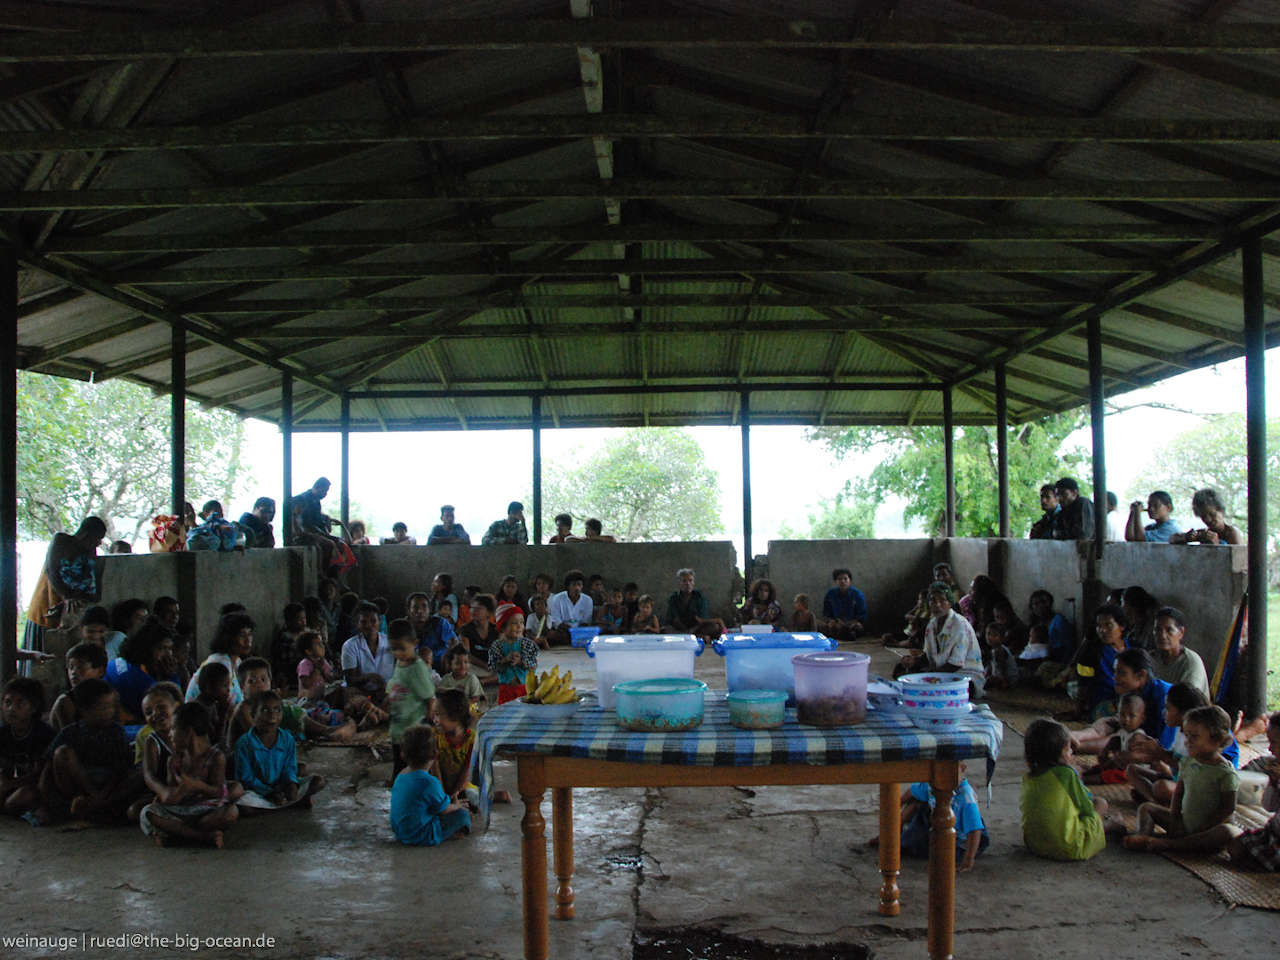 Villagers gathered under a roof